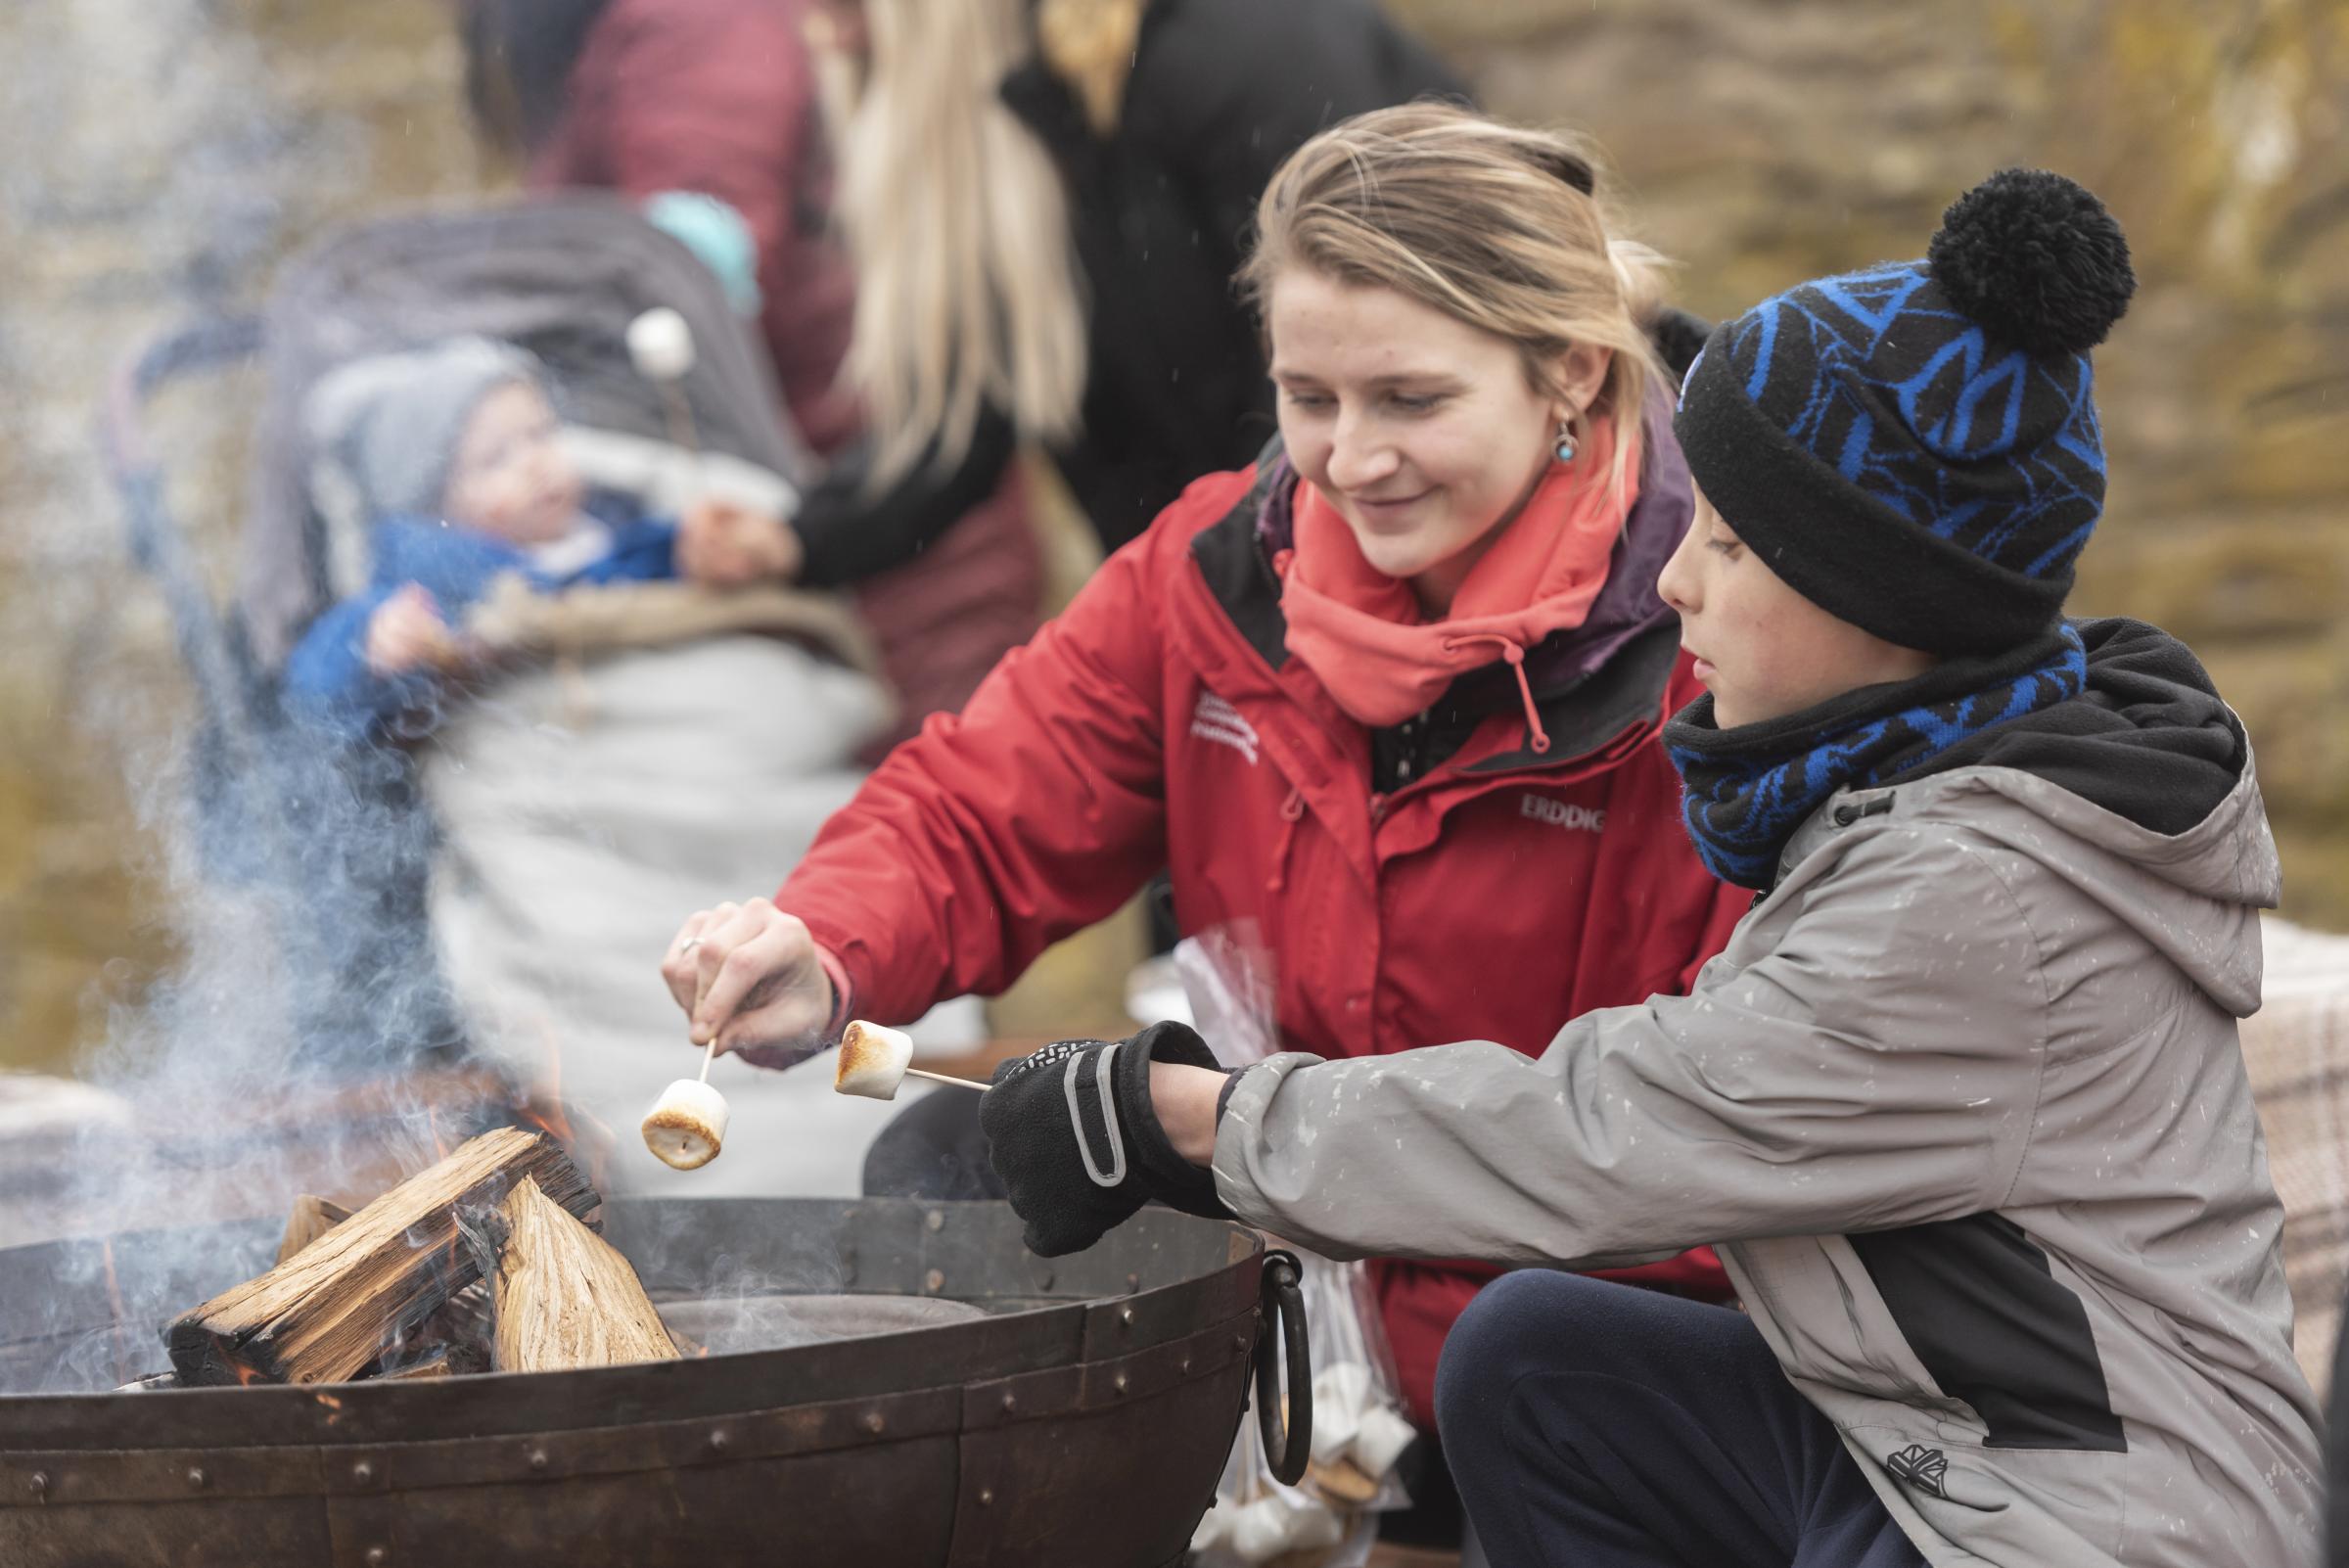 Staff and visitors toasting marshmallows on the fire at Erddig, Wrexham. Photo: National Trust Images-Paul Harris